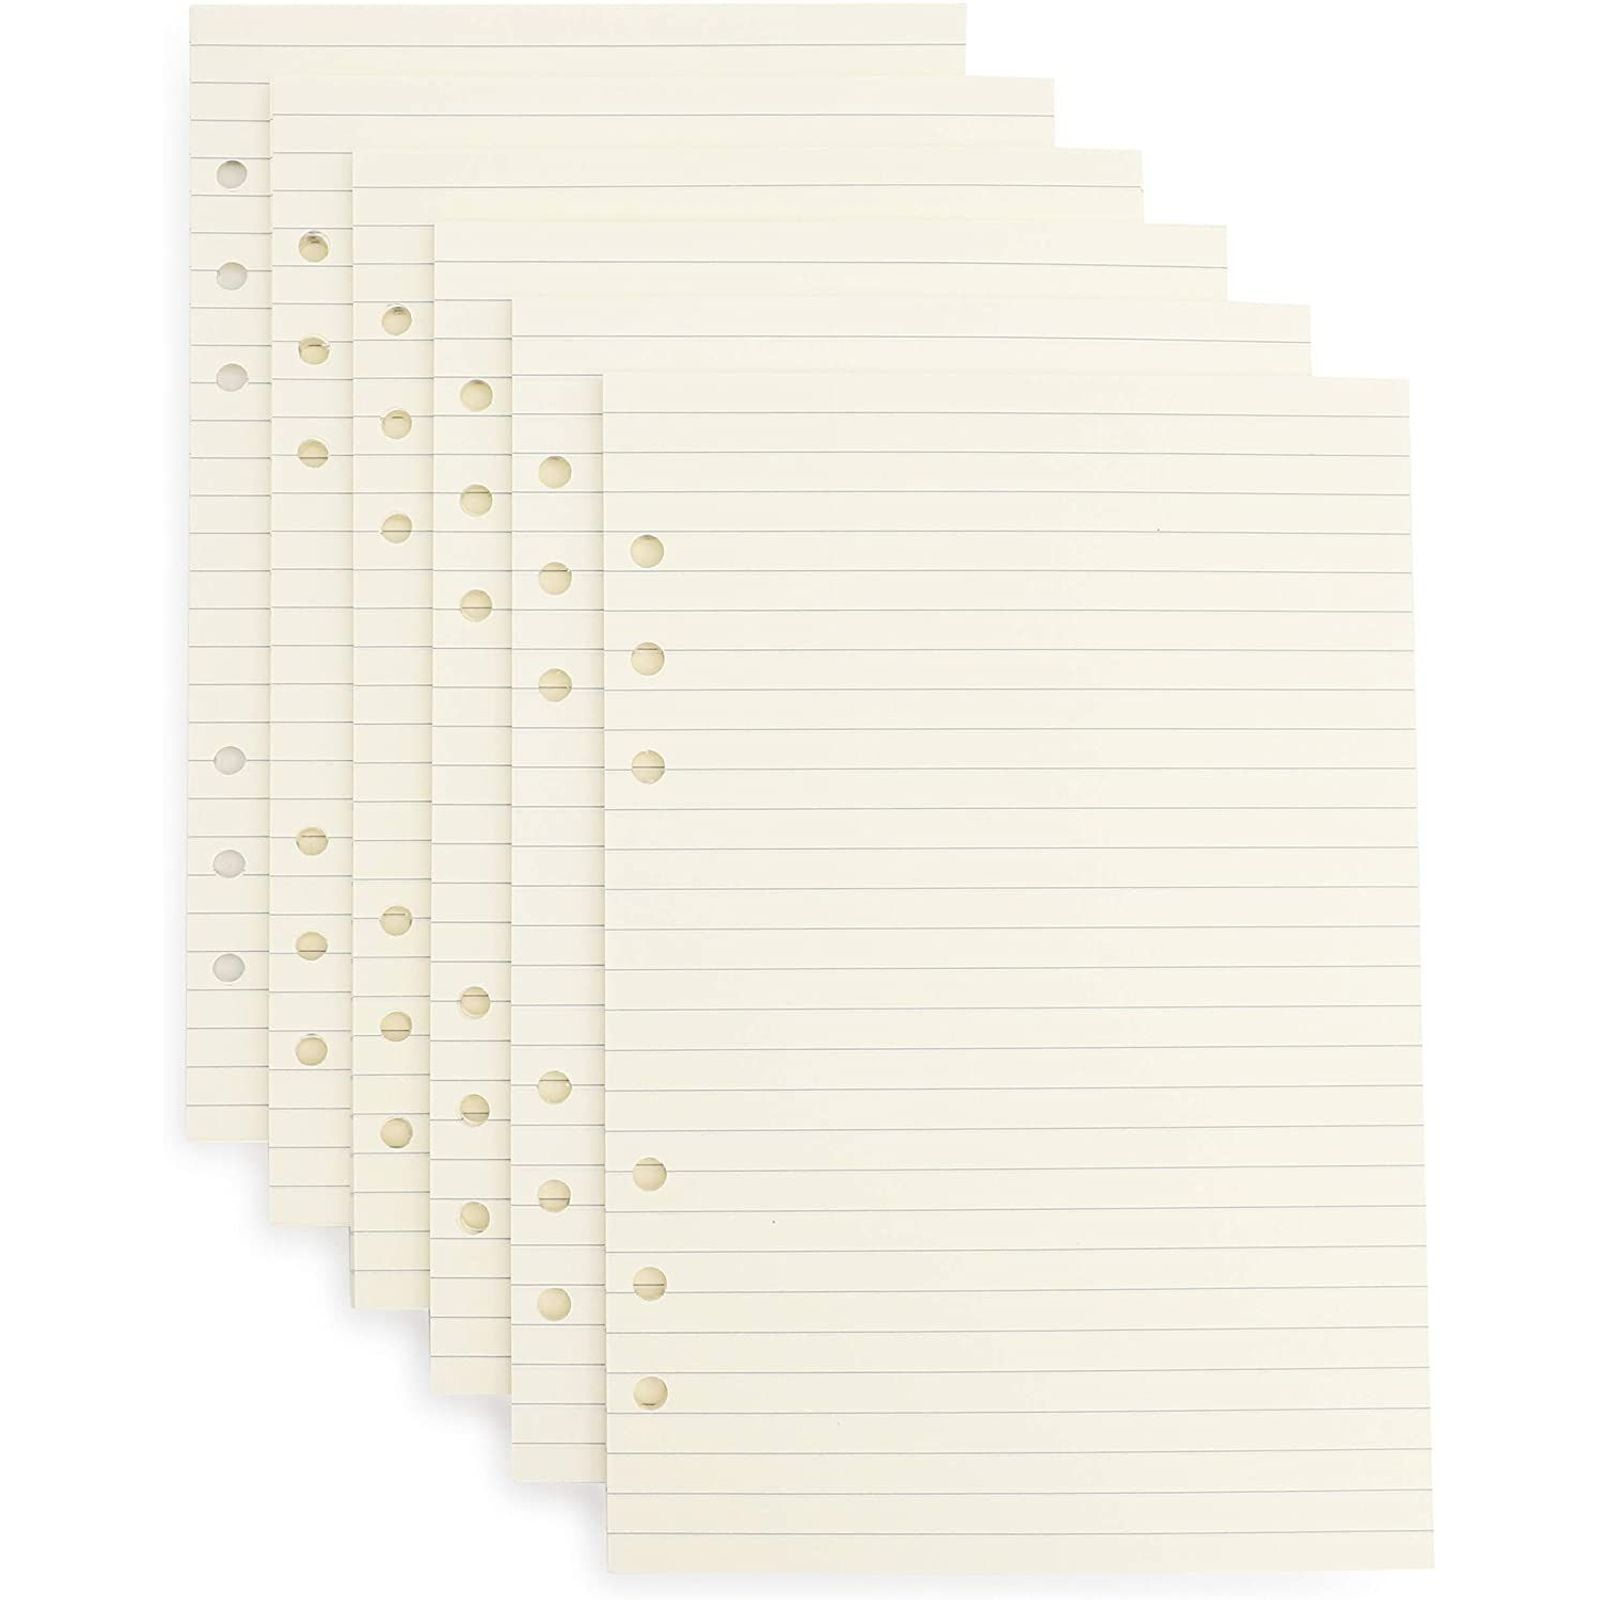 100 Sheet/200 Page A5 Refill Paper 6 Hole Punched Filler Paper Refills for A5 Loose Leaf Notebook Travel Journal Personal Diary Planner Binder Lined Paper 5.6 x 8.2